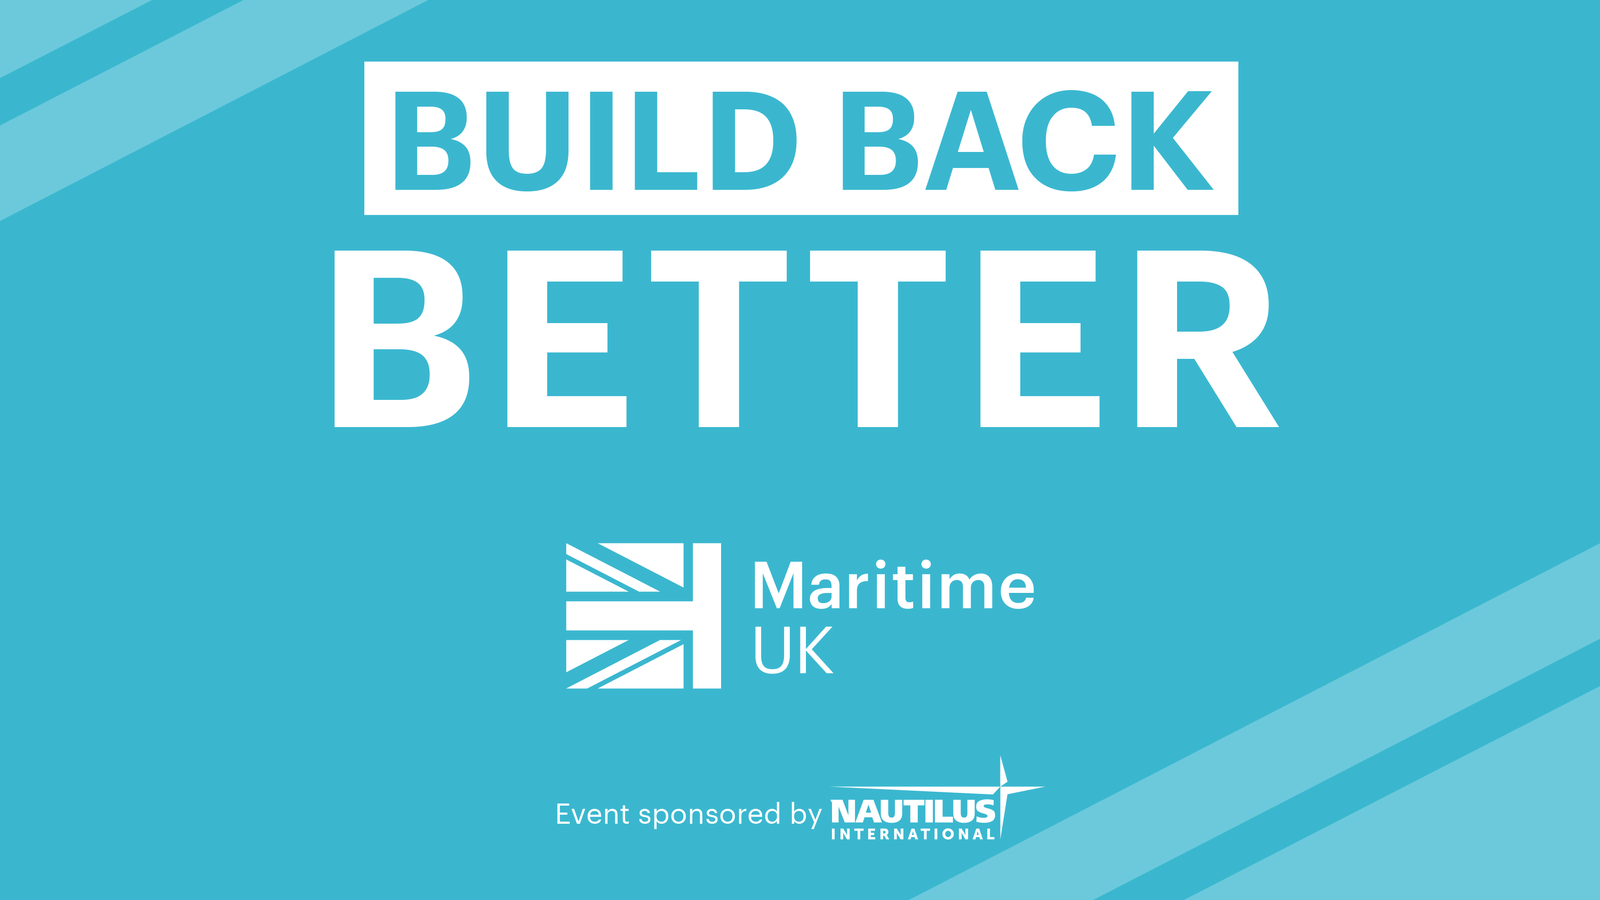 Build Back Better: What does it mean for maritime?